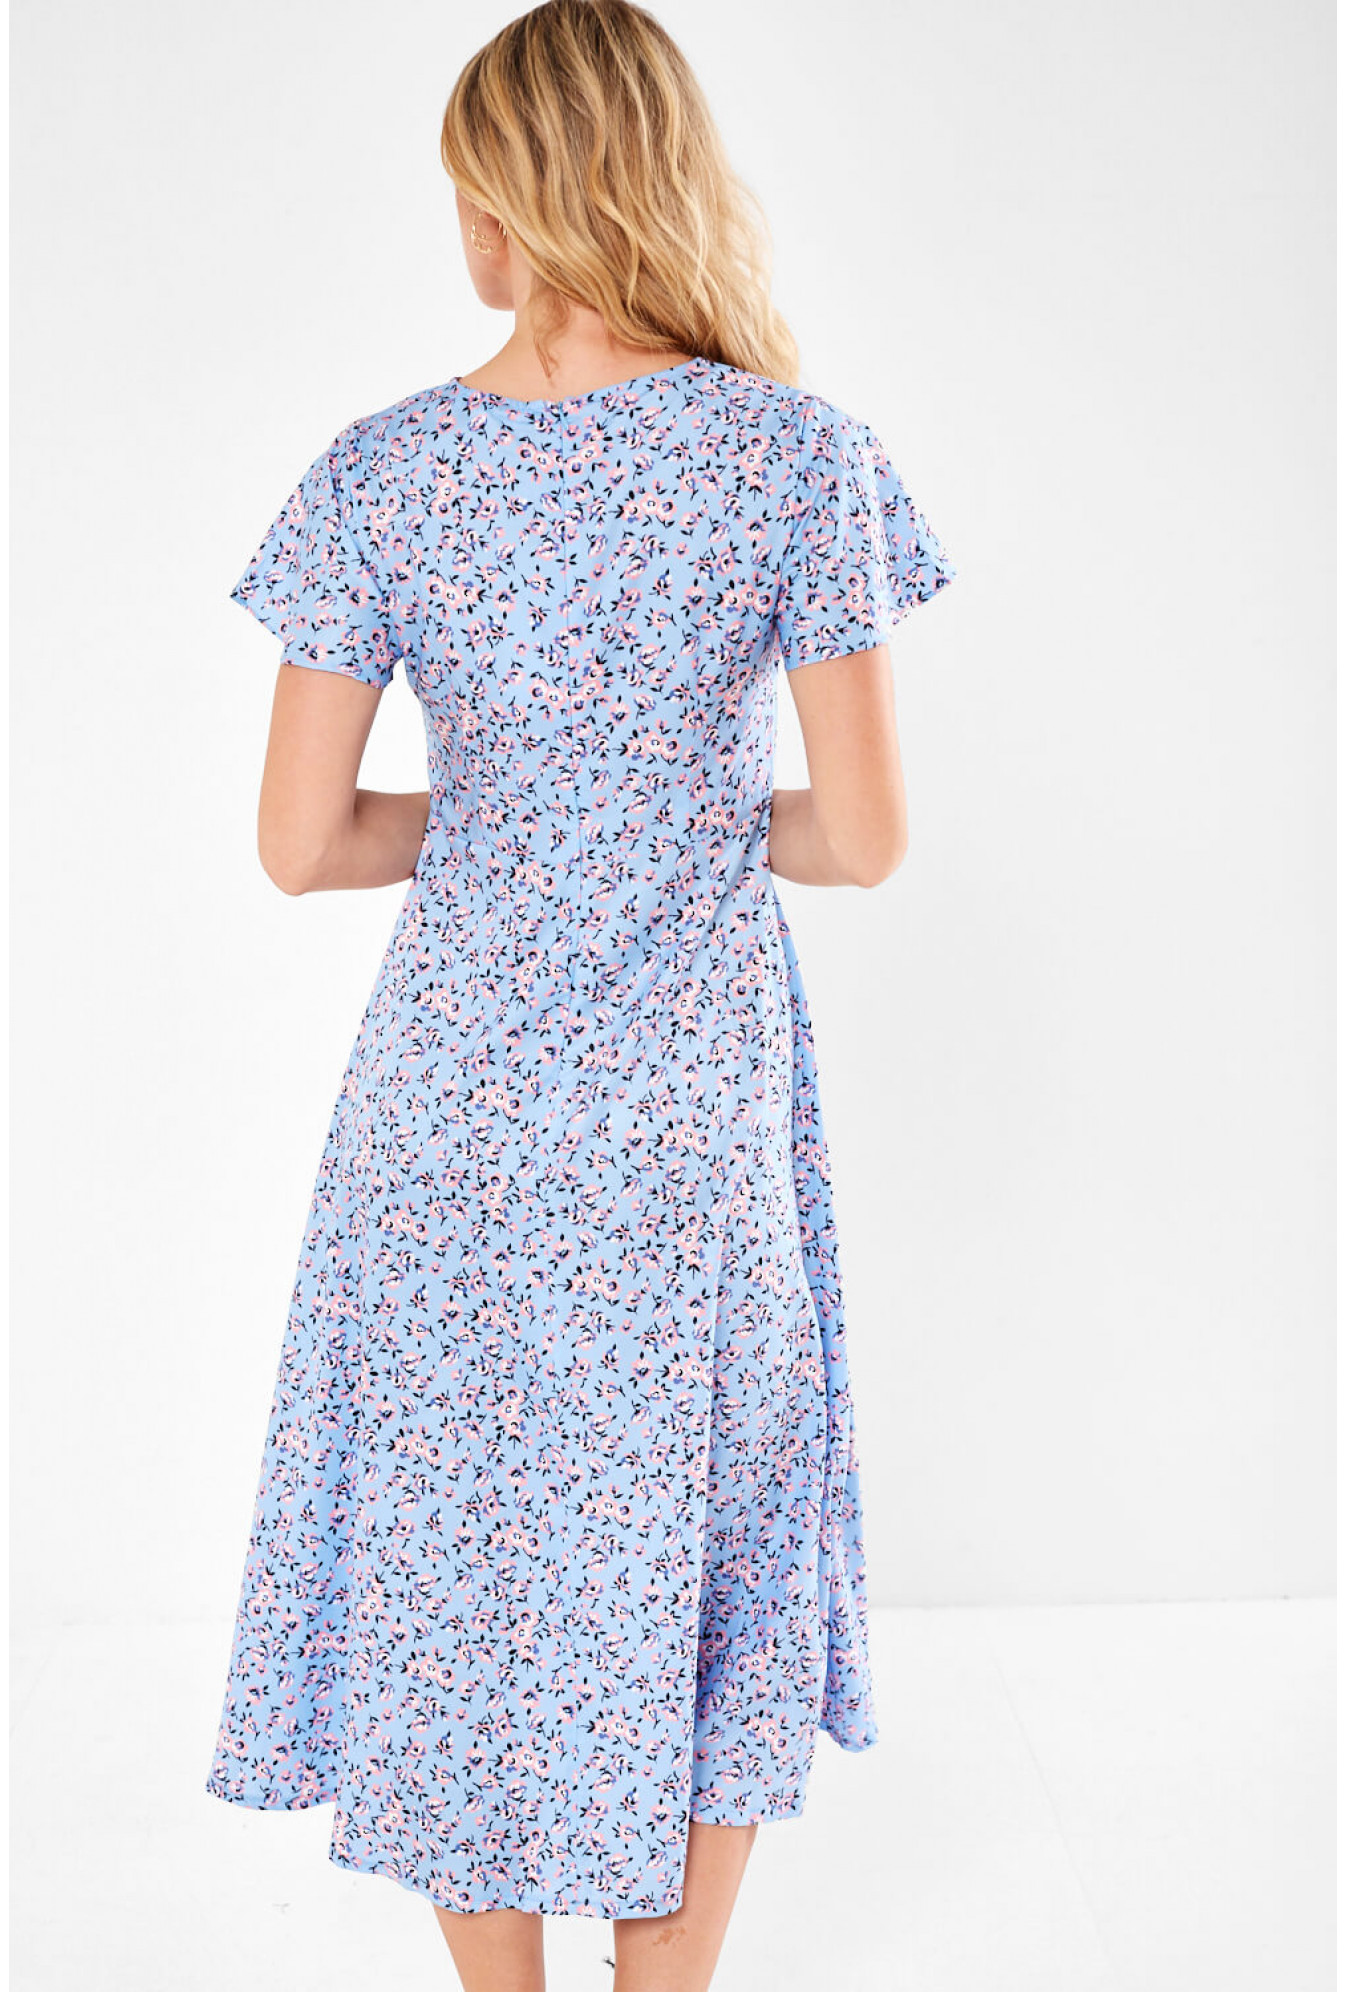 Tanya Ditsy Floral Midaxi Dress in Baby Blue